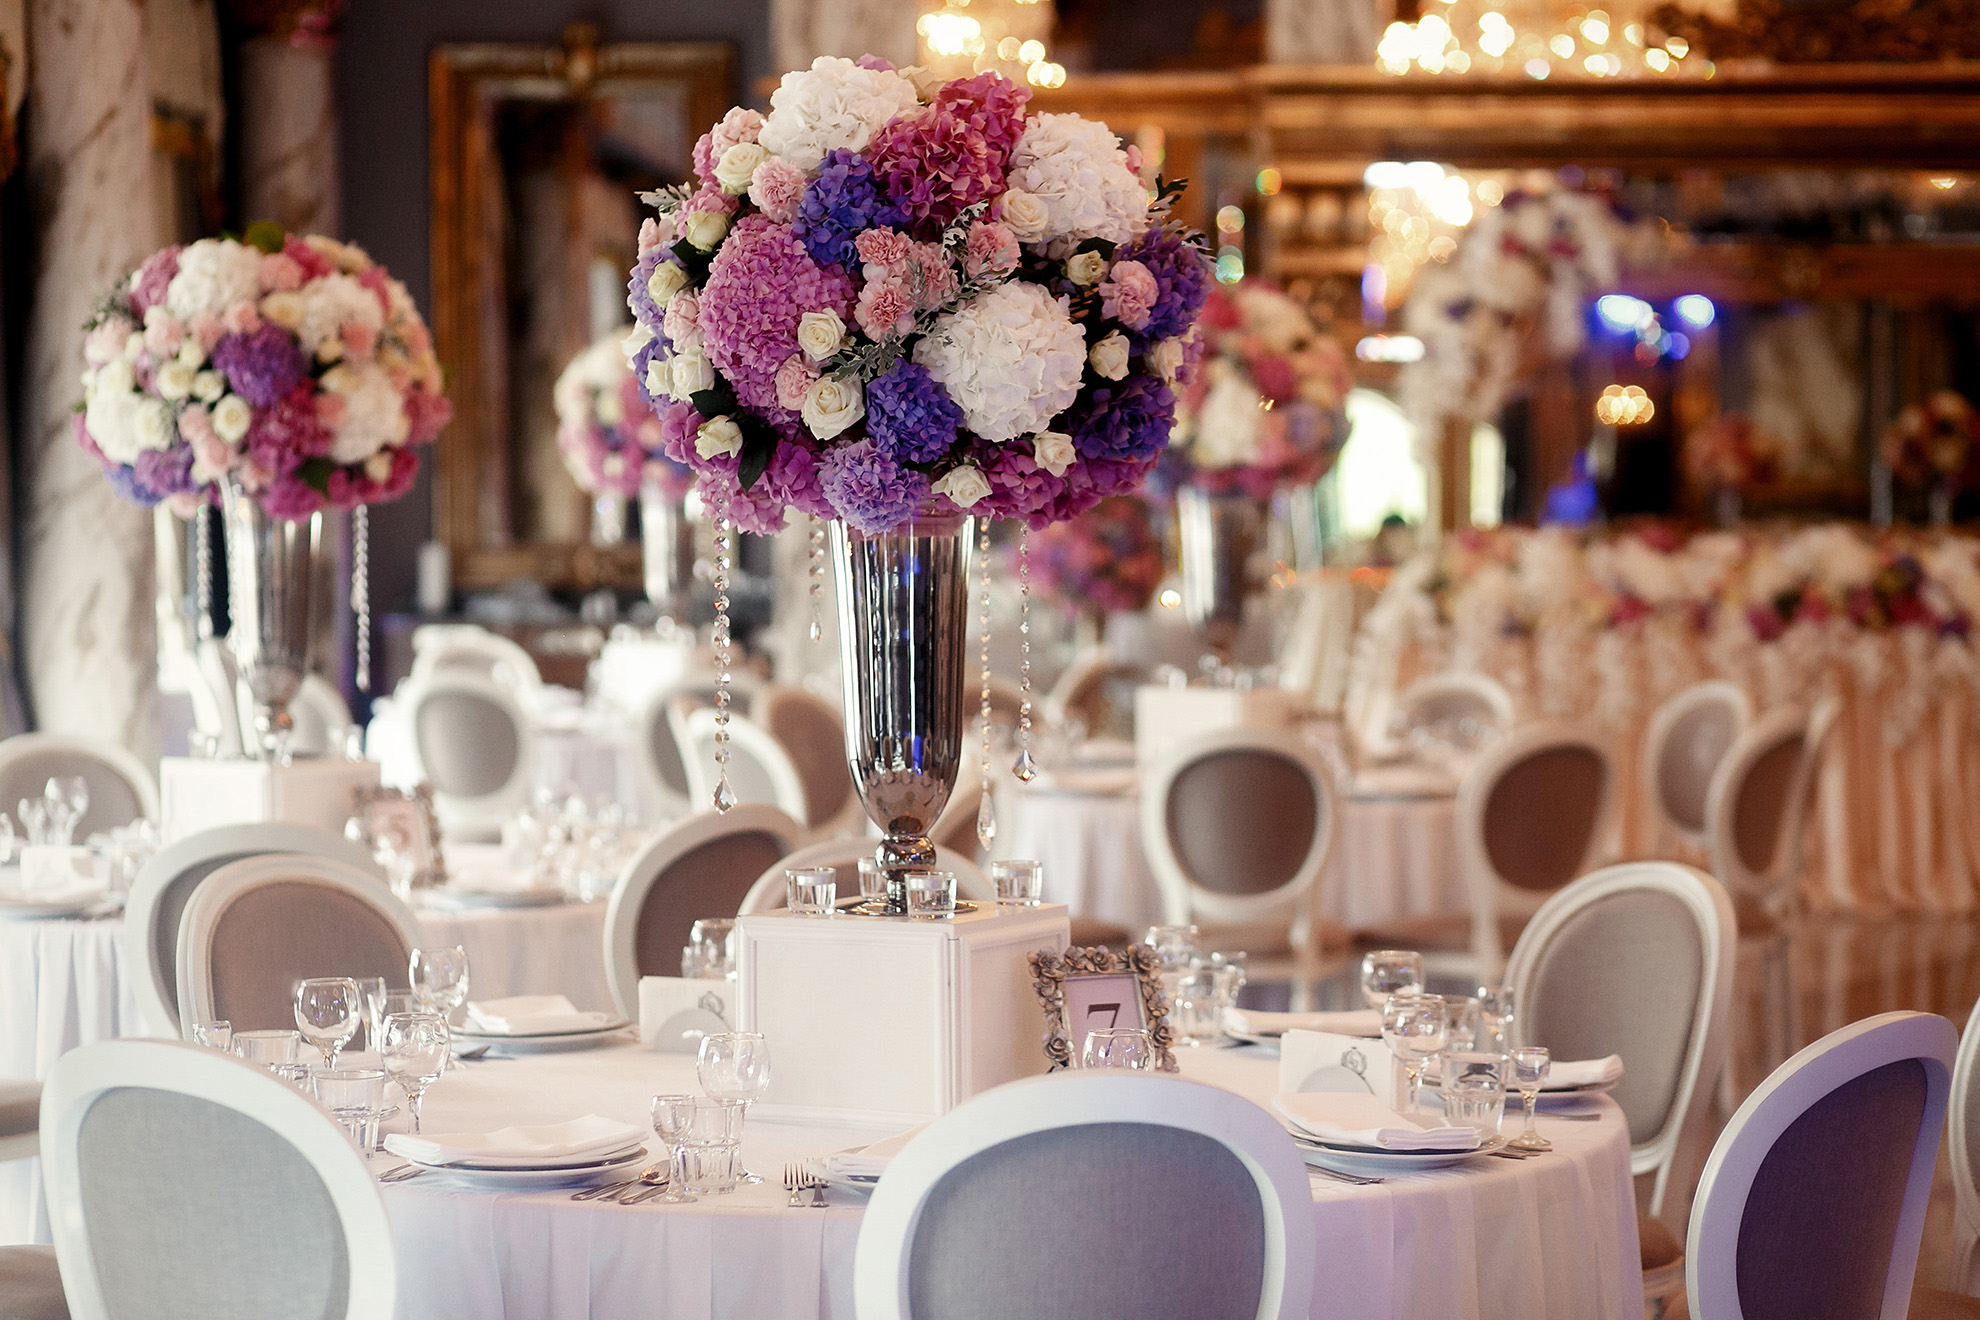 Indoor reception venue decorated with purple and pink